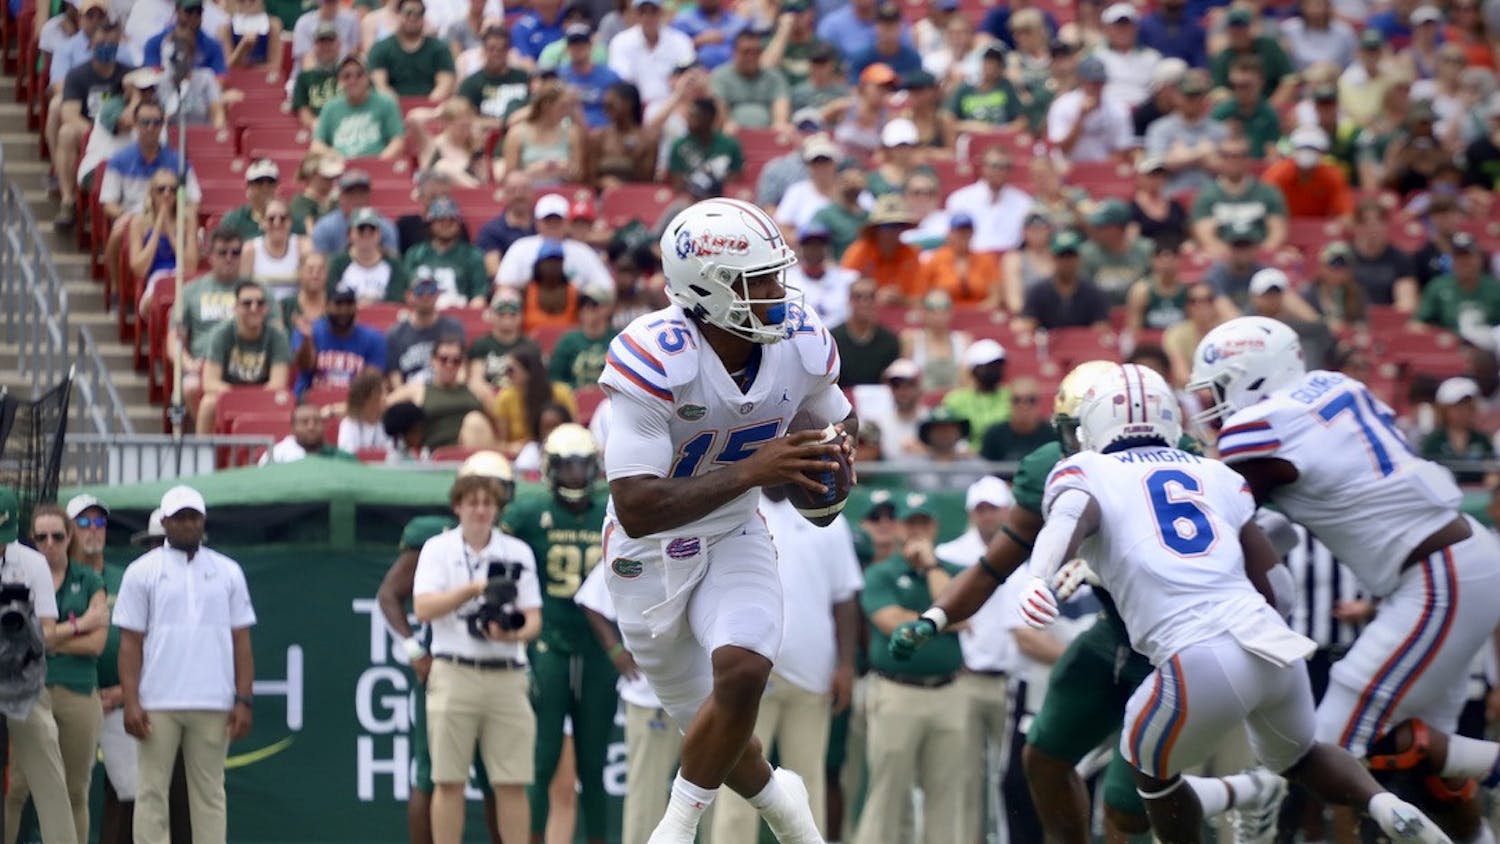 Quarterback Anthony Richardson scrambles to his right versus South Florida Sept. 11, 2021. Richardson will lead the Florida quarterback room this season, while the depth behind him is questionable.  